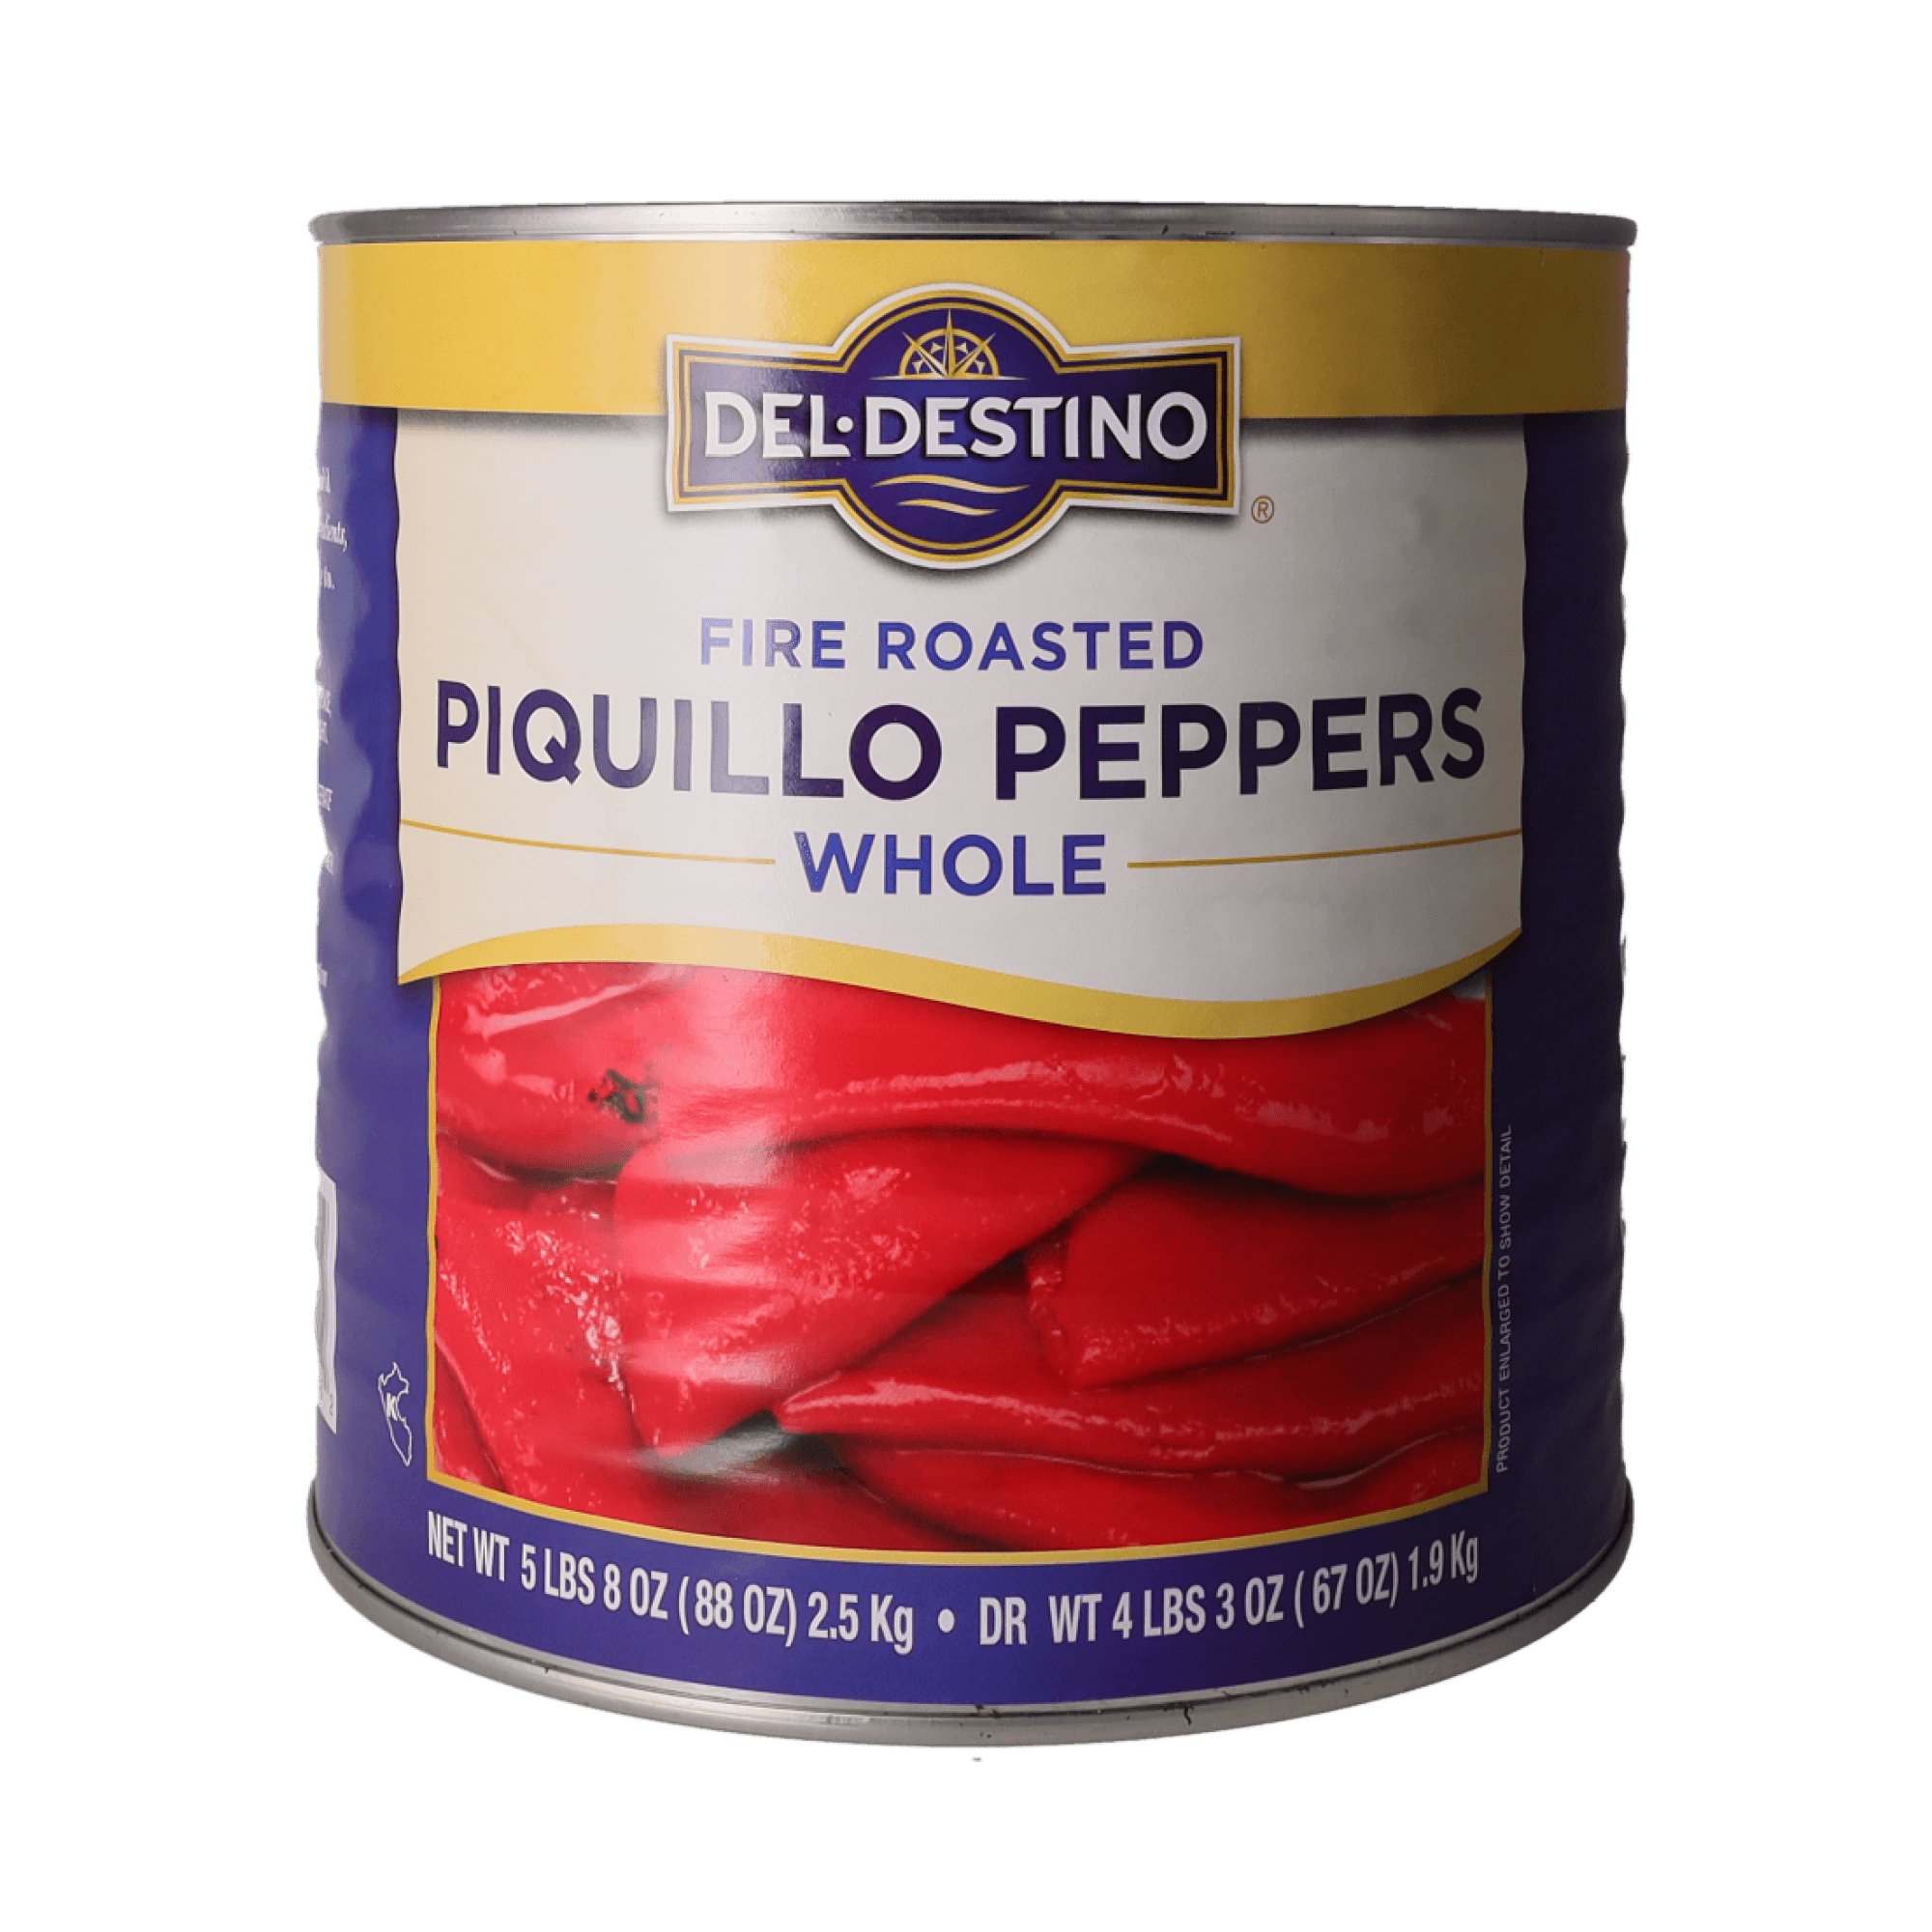 Piquillo Peppers - Savory Gourmet